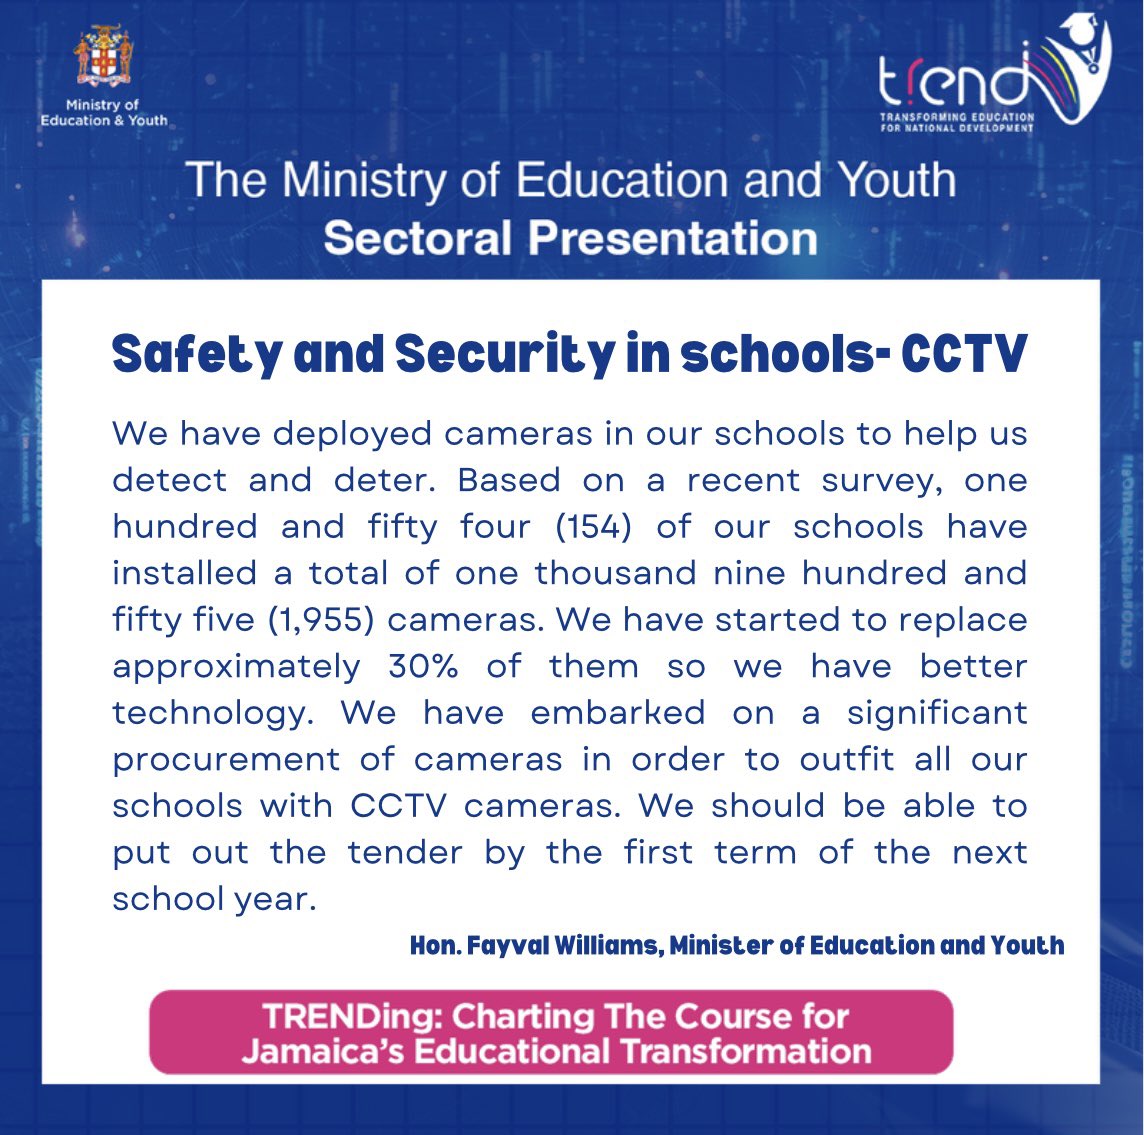 We're investing in the latest CCTV technology to detect and deter, ensuring our students and educators can thrive.